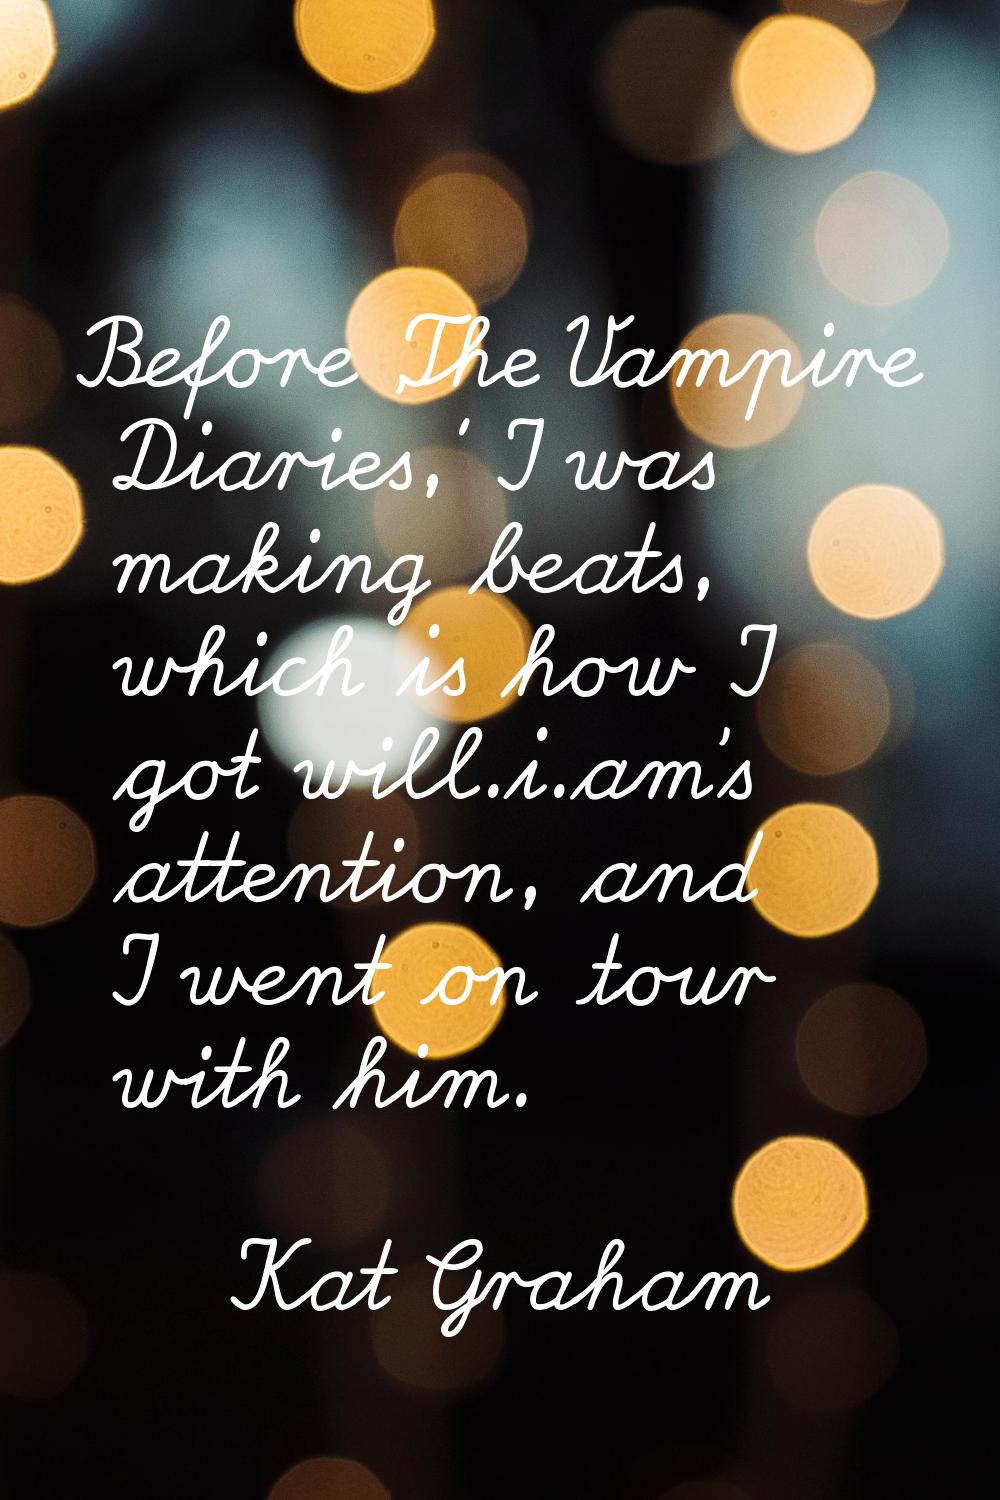 Before 'The Vampire Diaries,' I was making beats, which is how I got will.i.am's attention, and I w